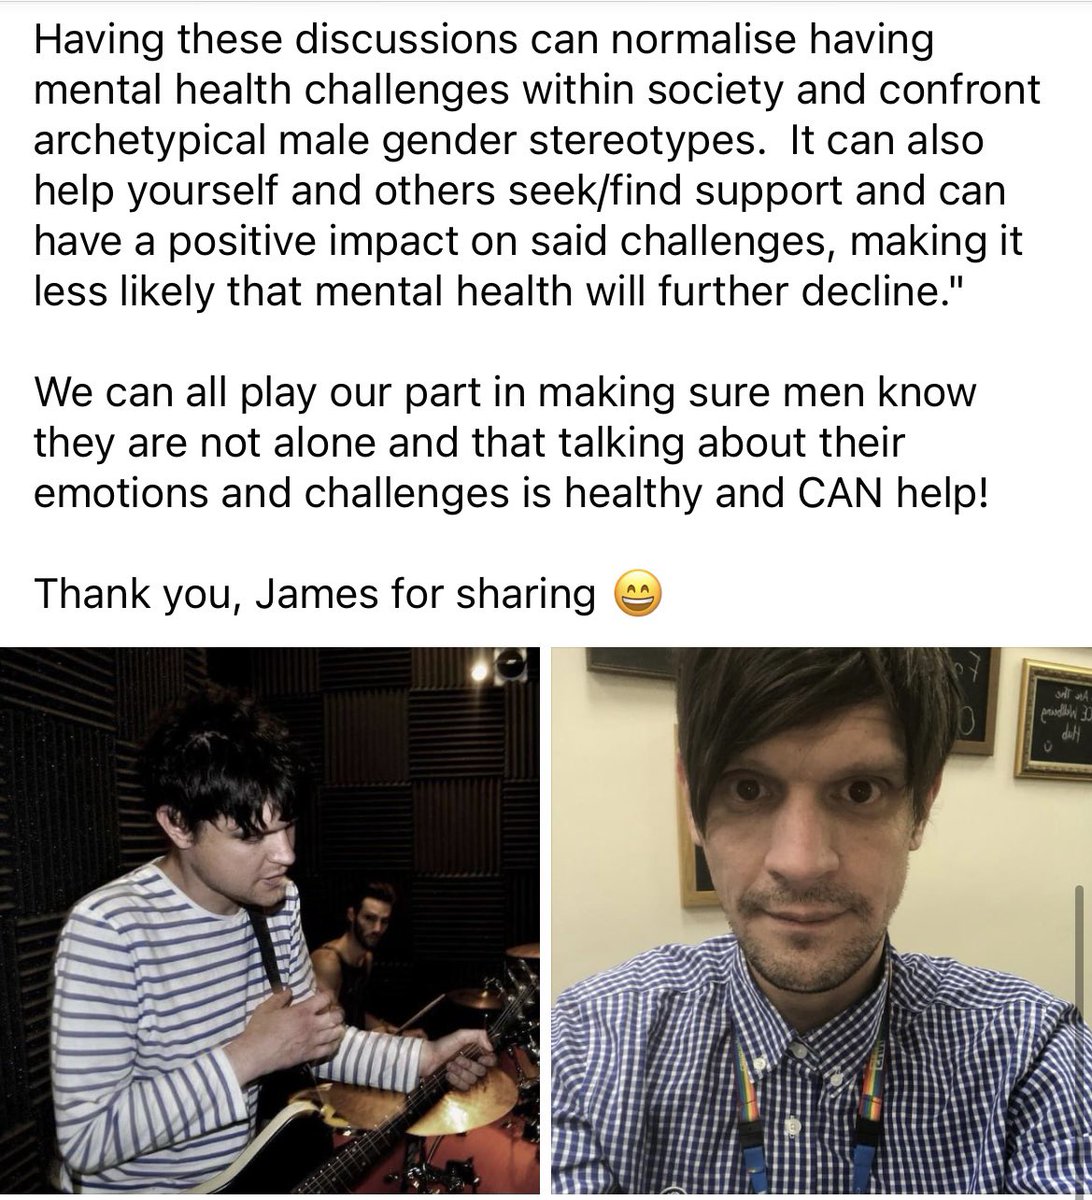 We are so proud of @CPFT_NHS Rotational Peer Support Worker James, who has recently started a rotation in @CPFT_RCE for sharing a part of his journey with us. 

#proudtobeapeer #internationalmensday

@bristow01 @sharongilfoyle1 @NHSOTRob @AngelaLavell @AbbyKumar12